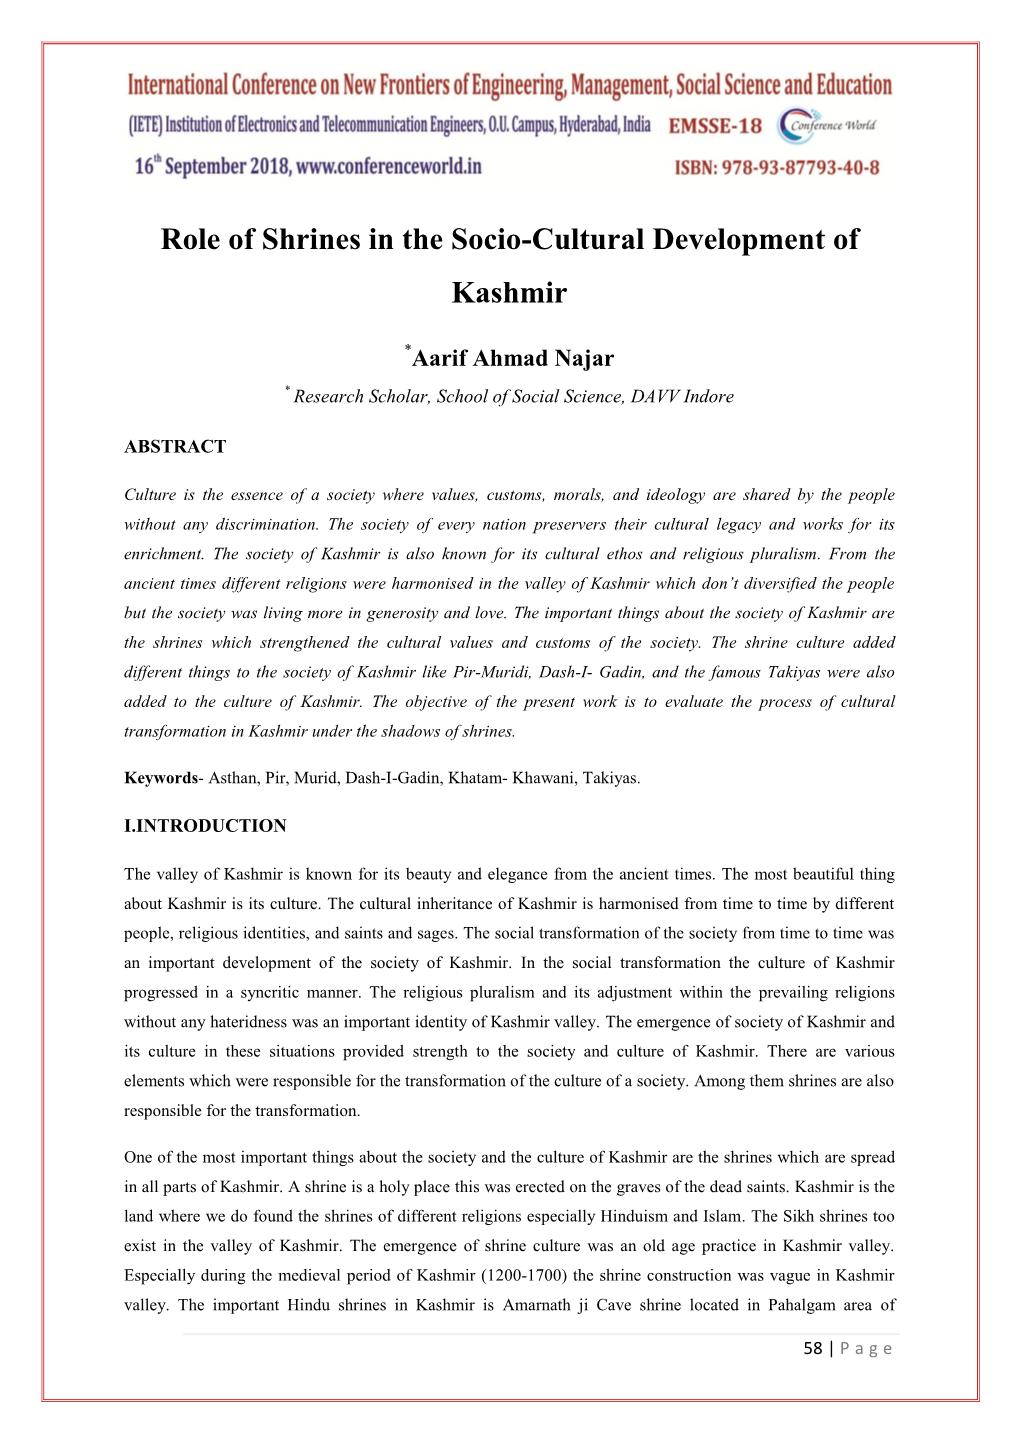 Role of Shrines in the Socio-Cultural Development of Kashmir